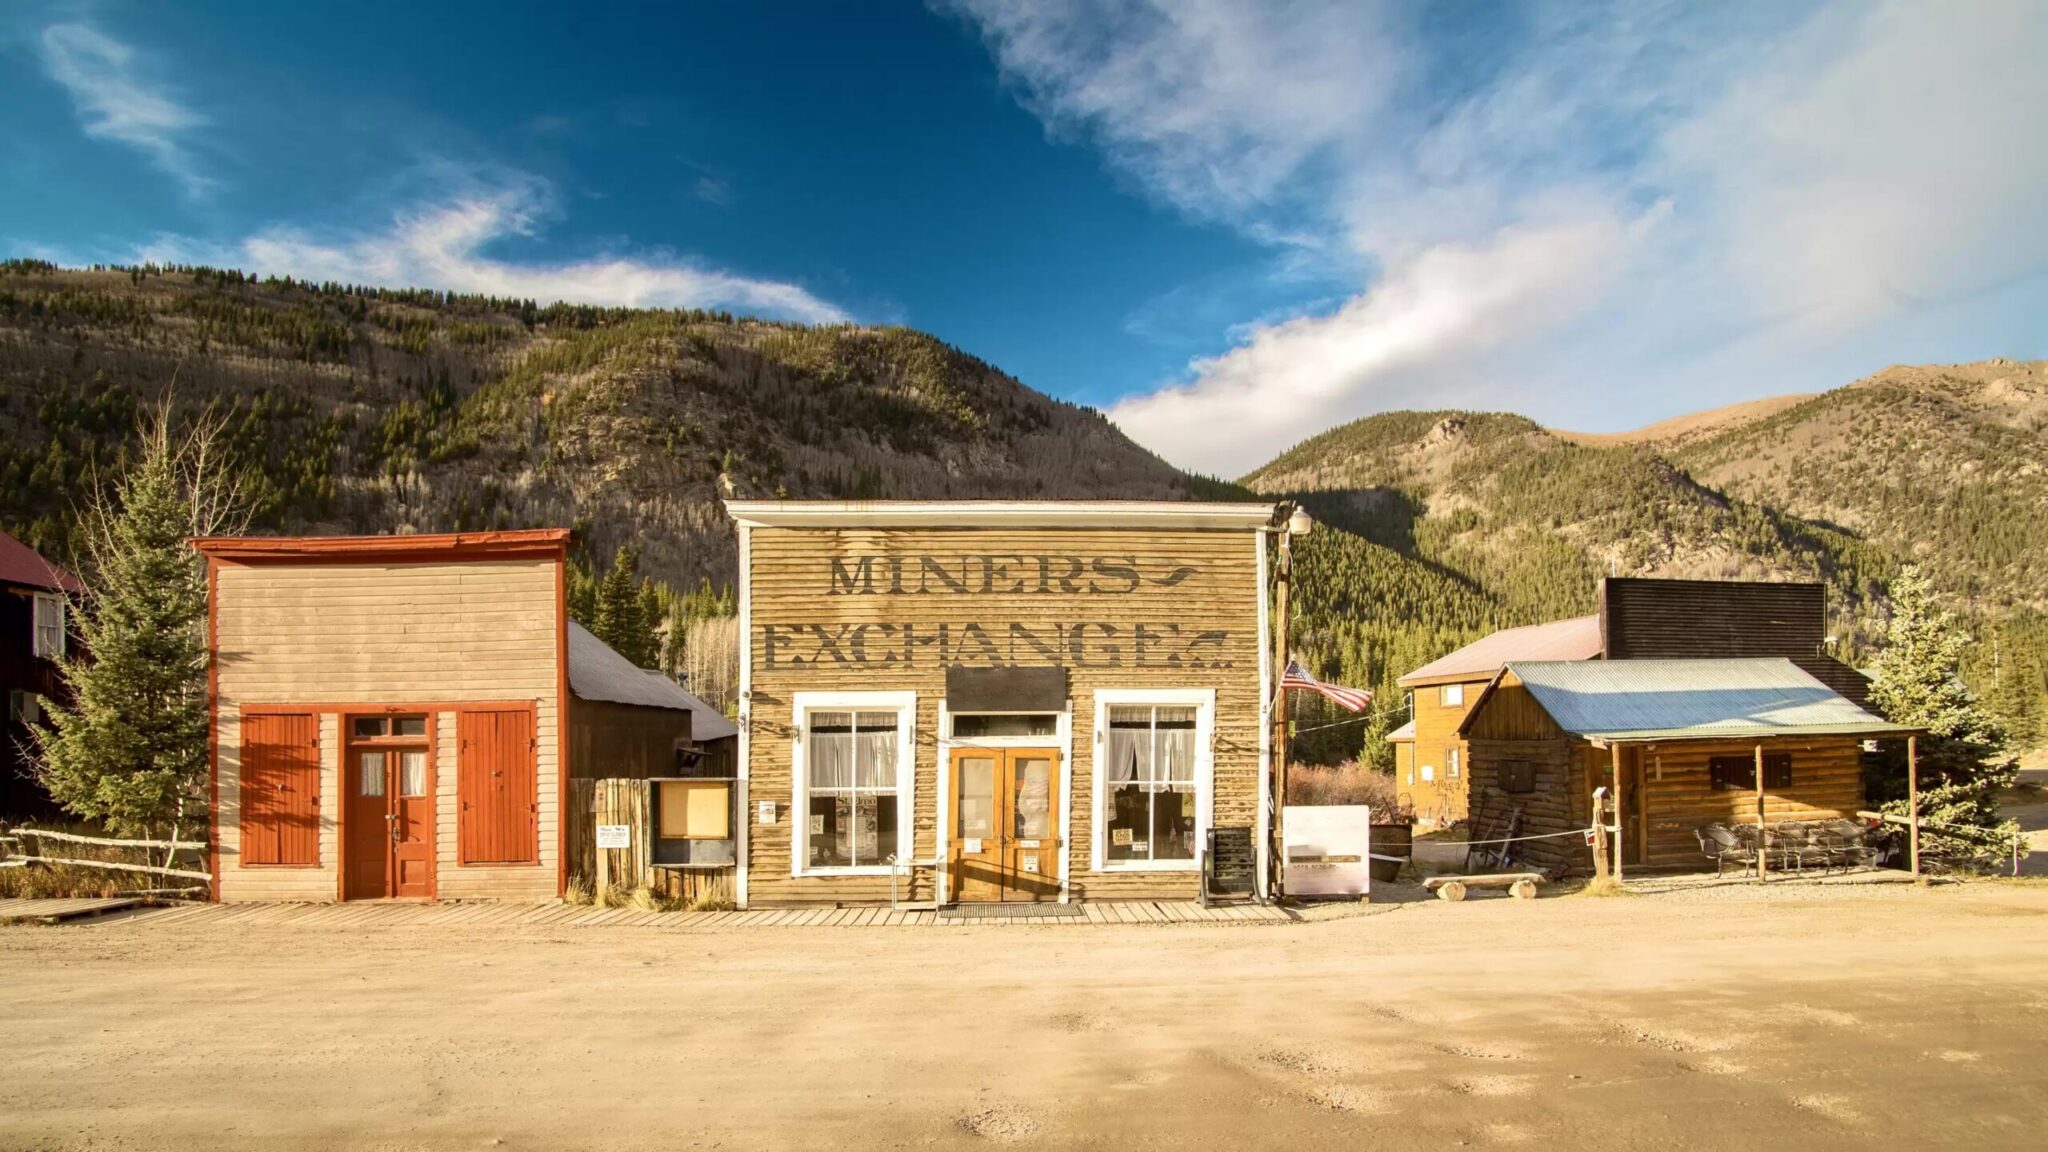 The USA’s Most Fascinating Ghost Towns